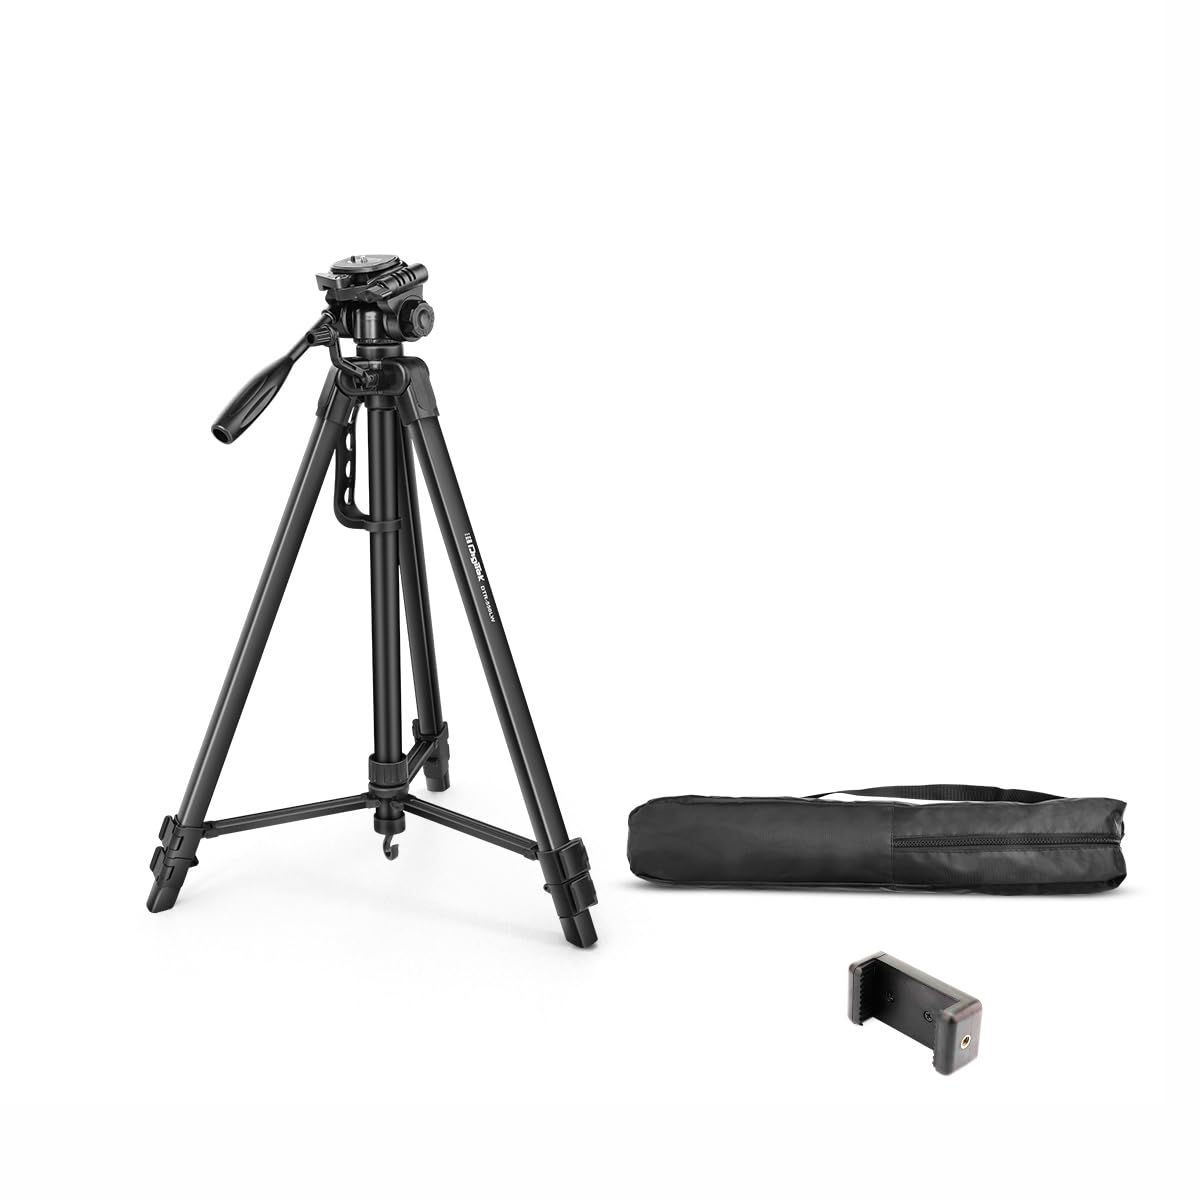 Professional Digitek DTR 550 Lightweight Tripod with Adjustable Height and Quick Release Head for Cameras and Smartphones.